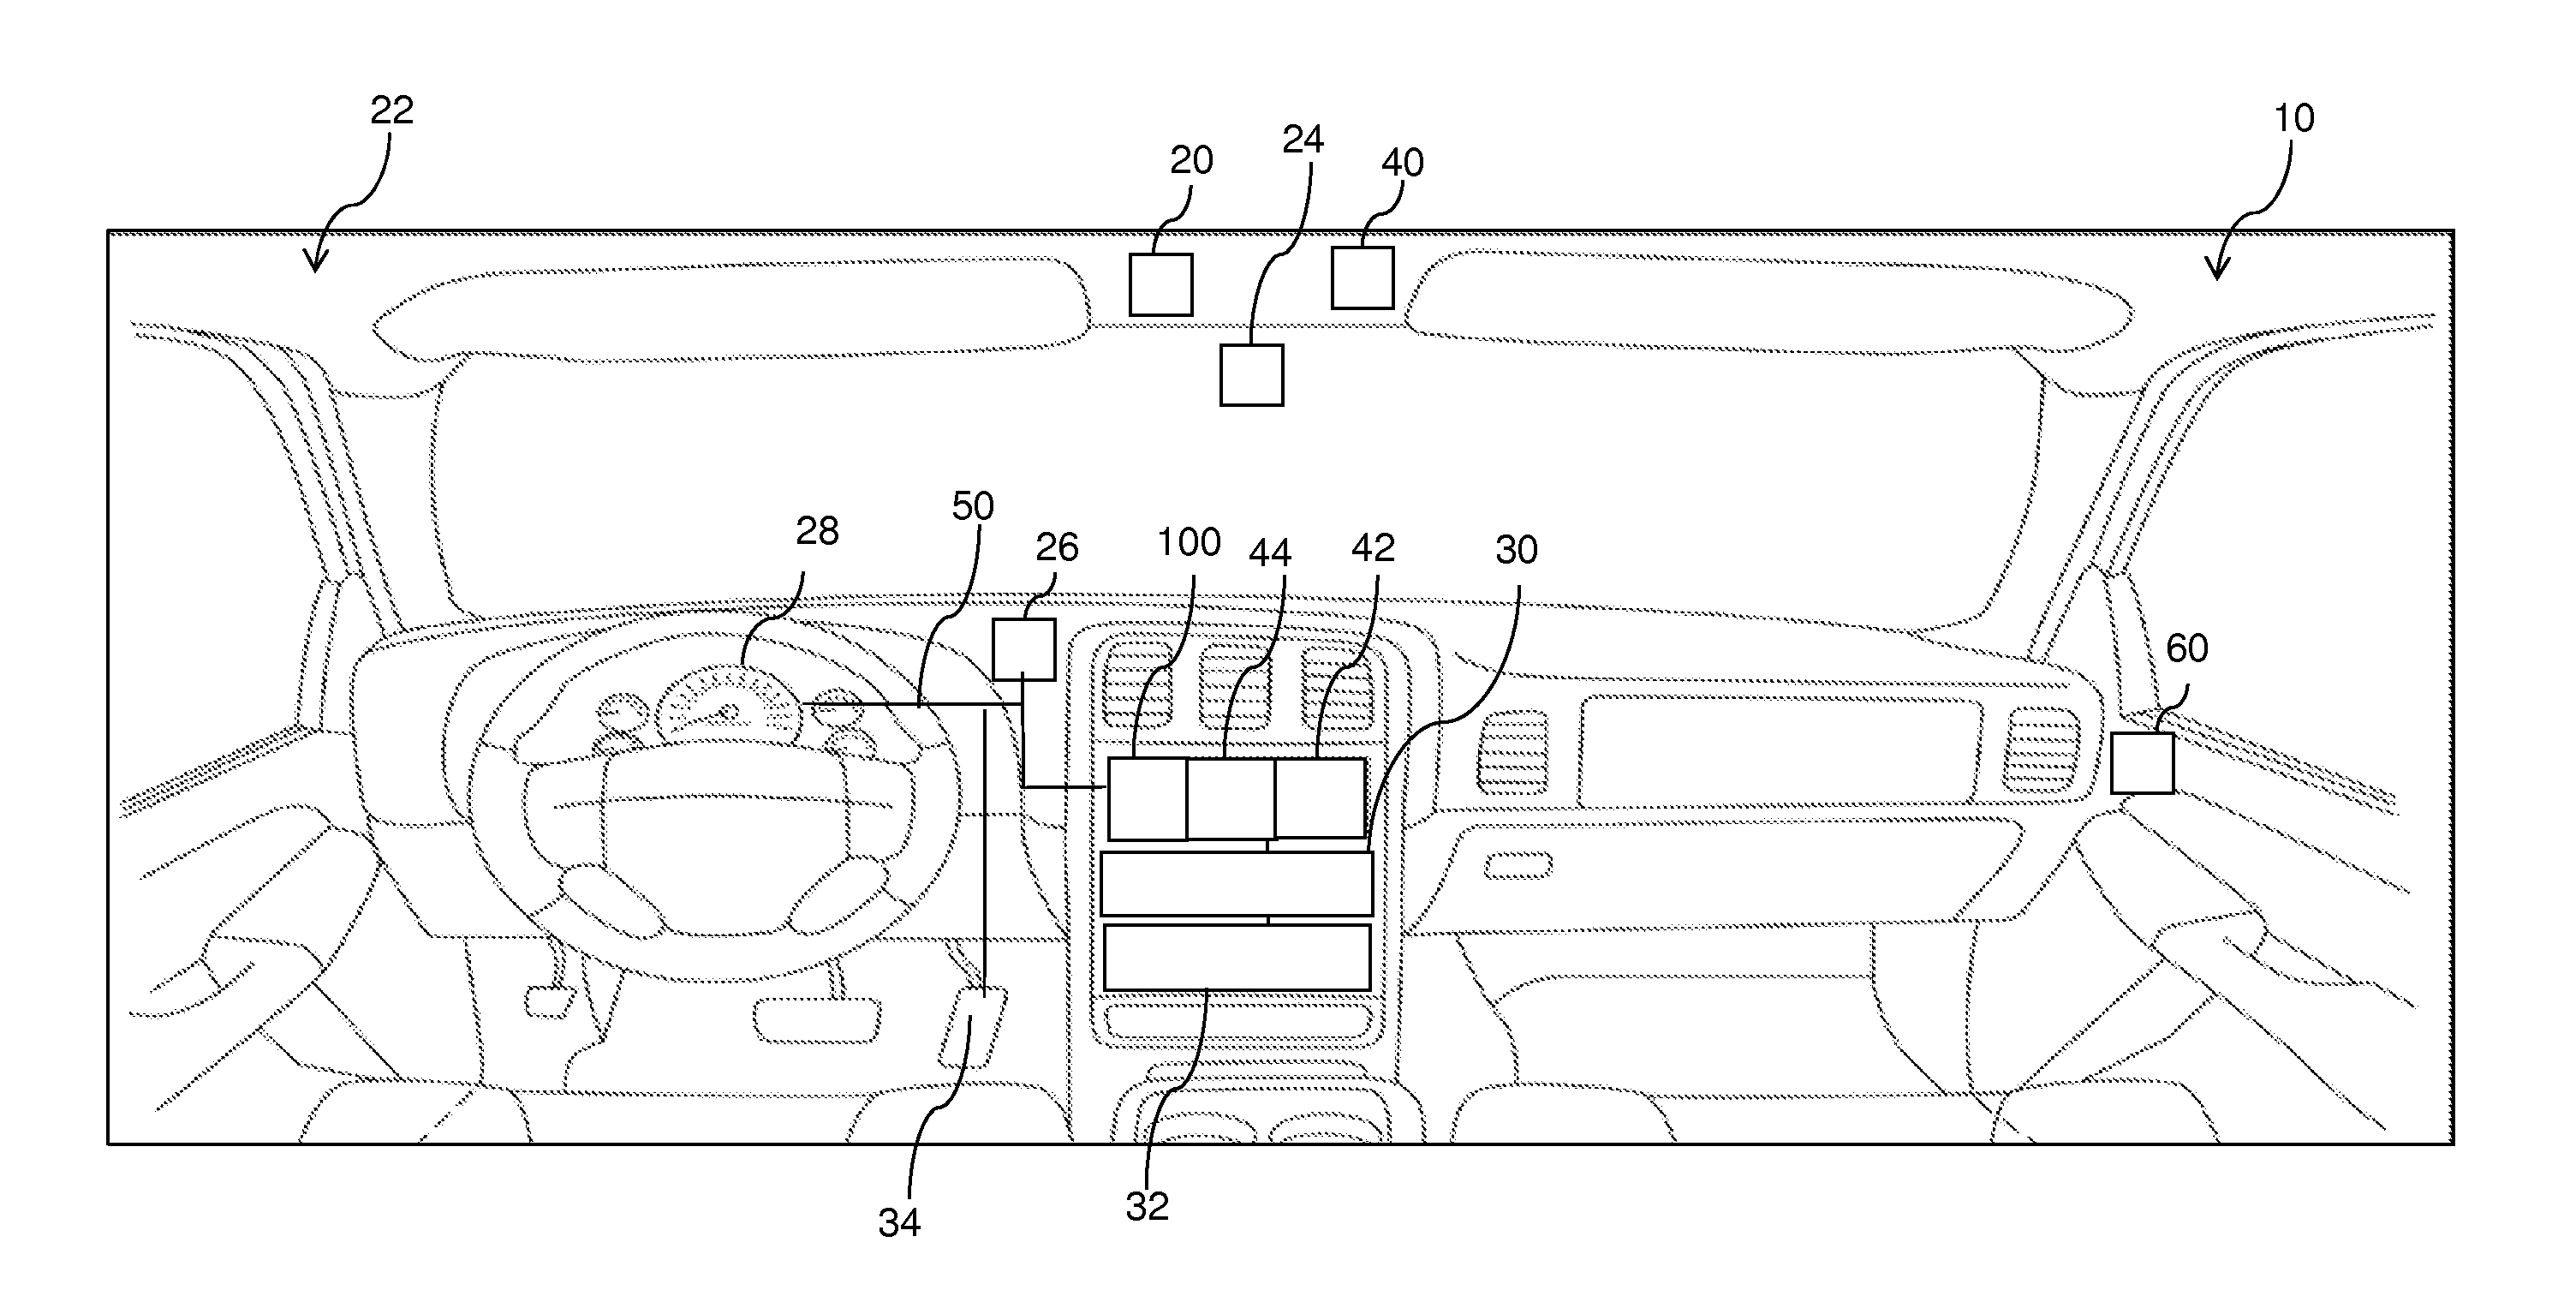 Method and system for using sound related vehicle information to enhance spoken dialogue